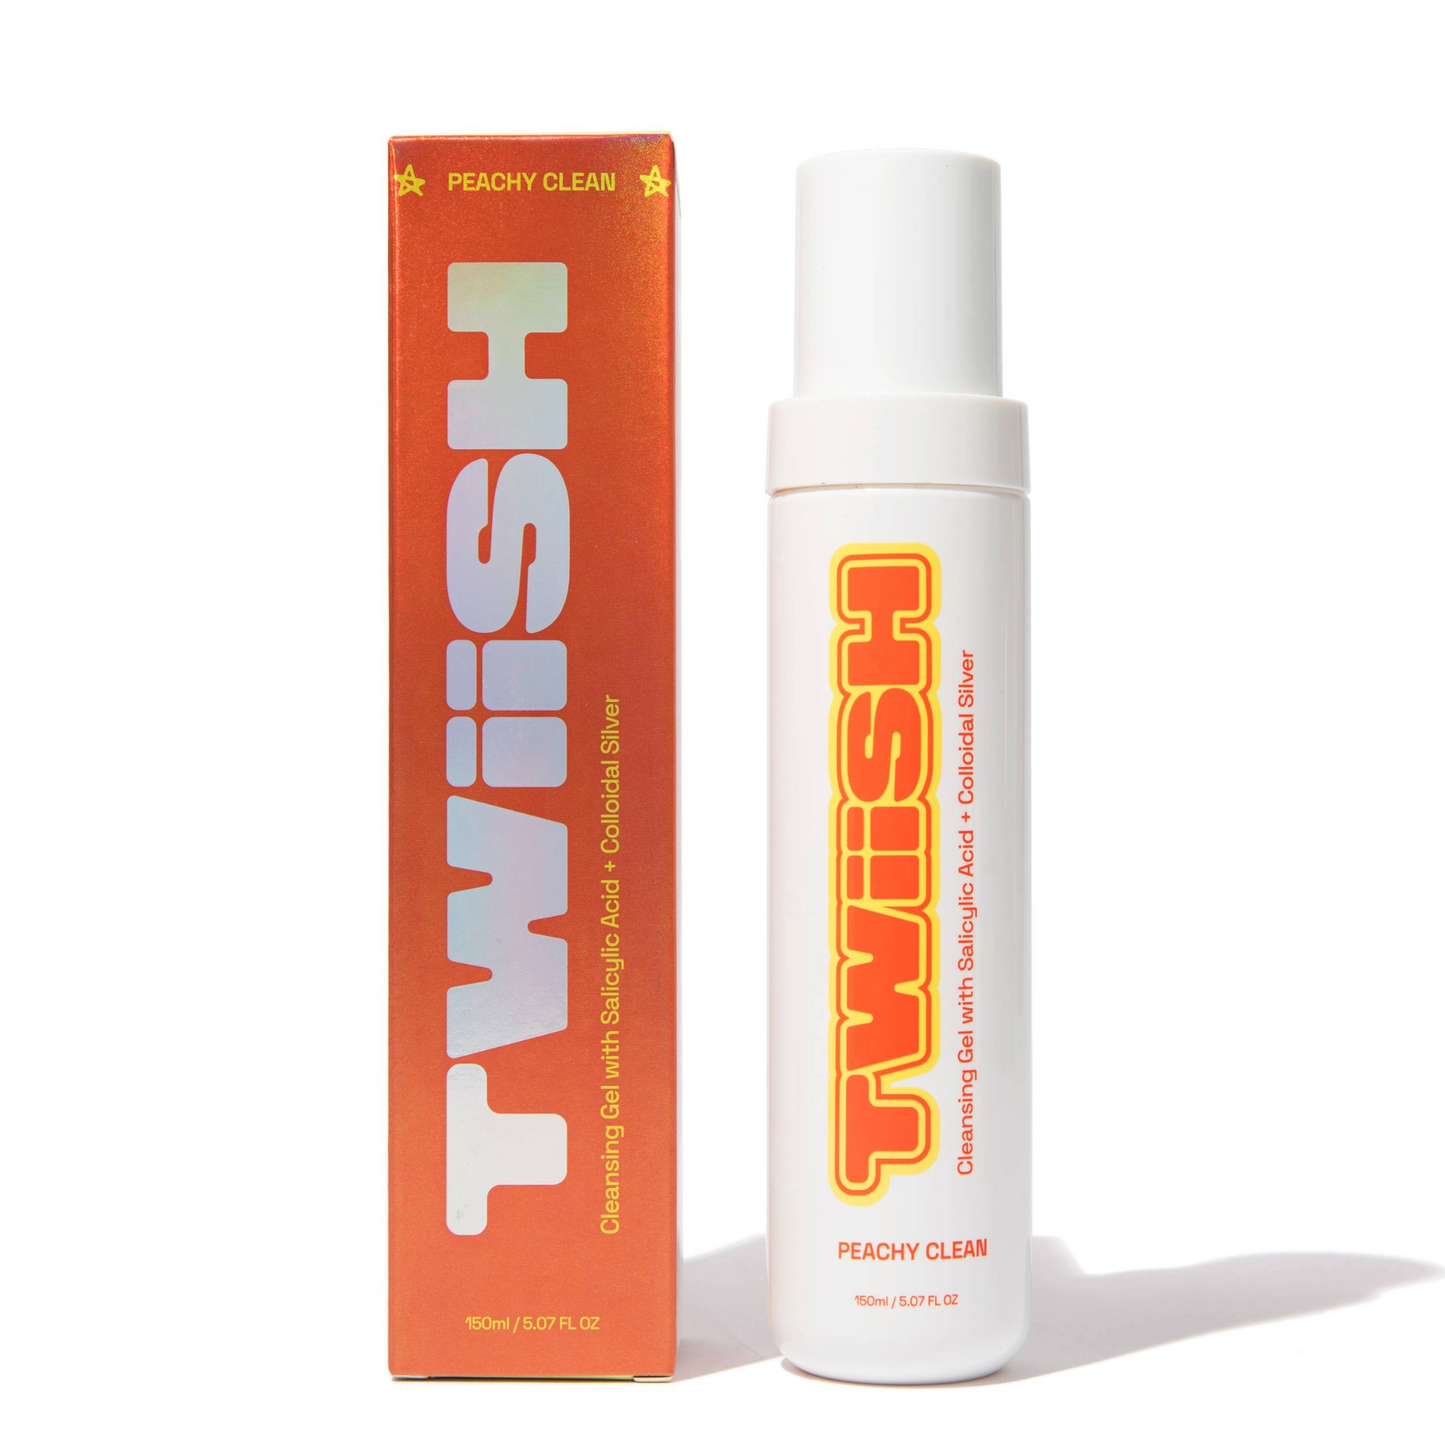 Peachy Clean Clarifying Face Cleanser by TWiiSH